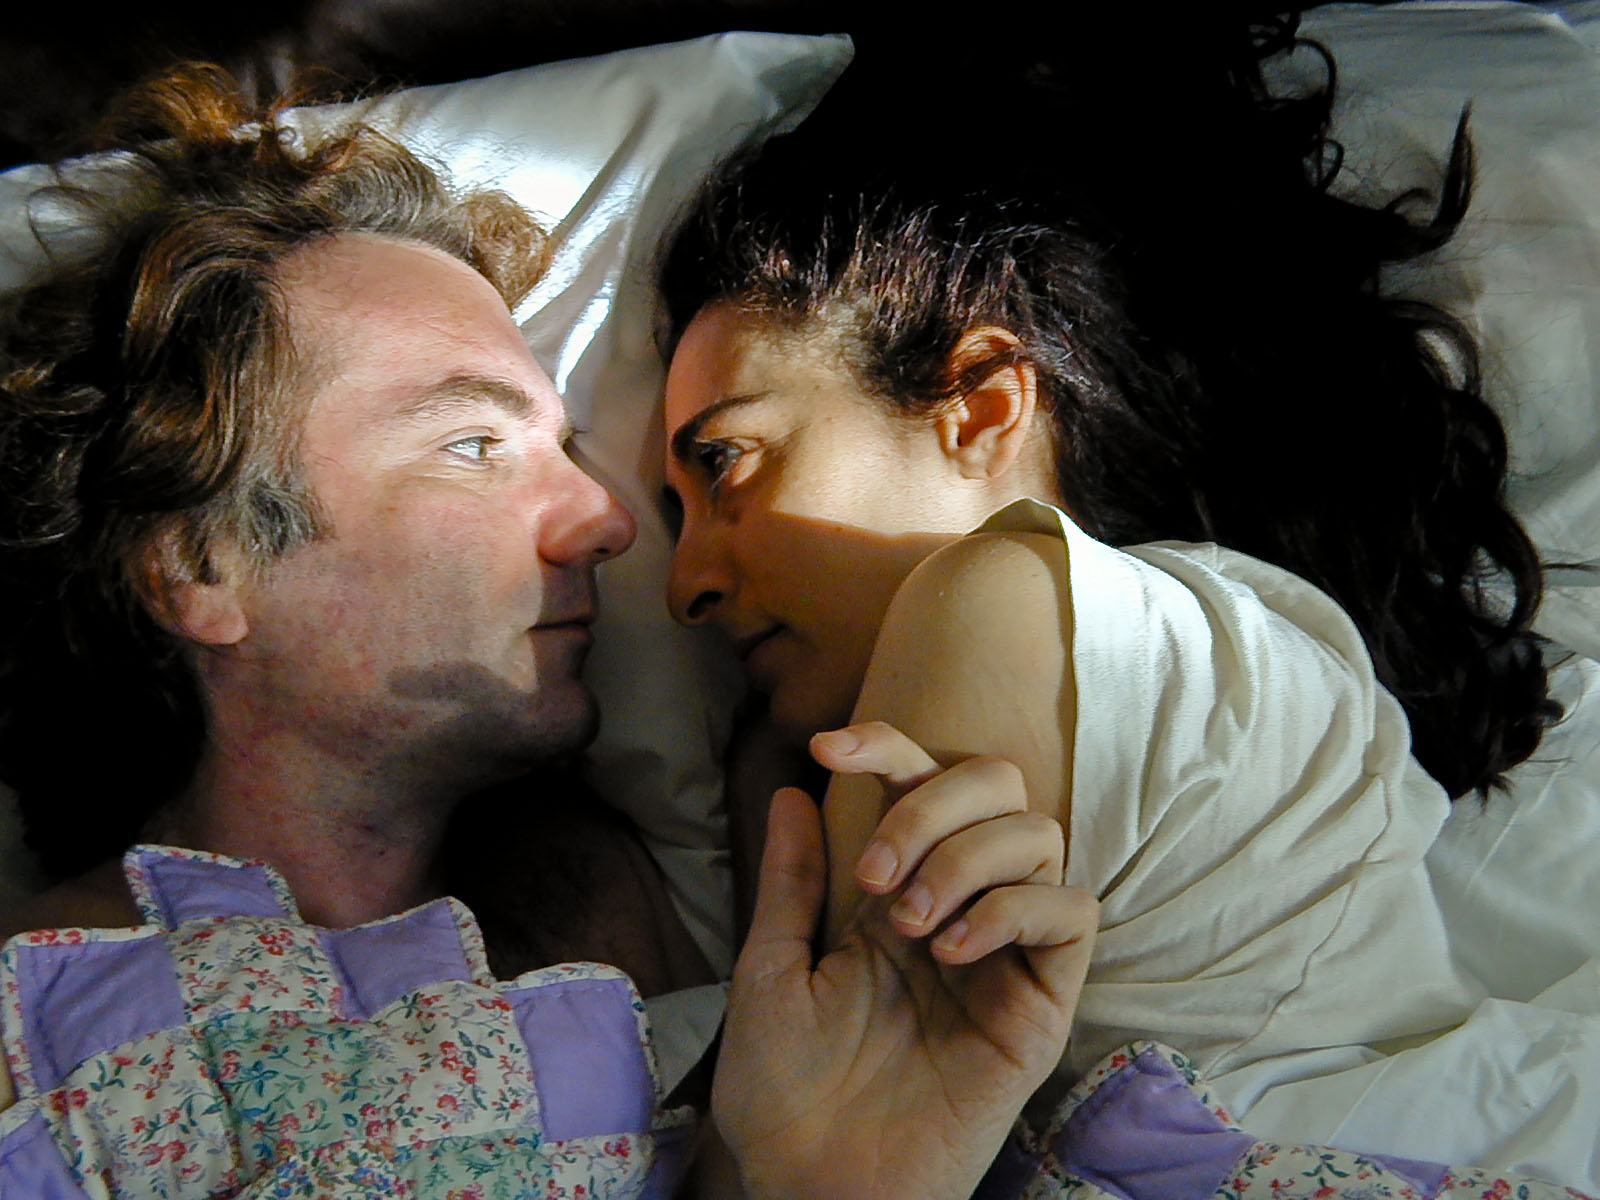 Scenes From a Life: Intimate Couples, In Bed